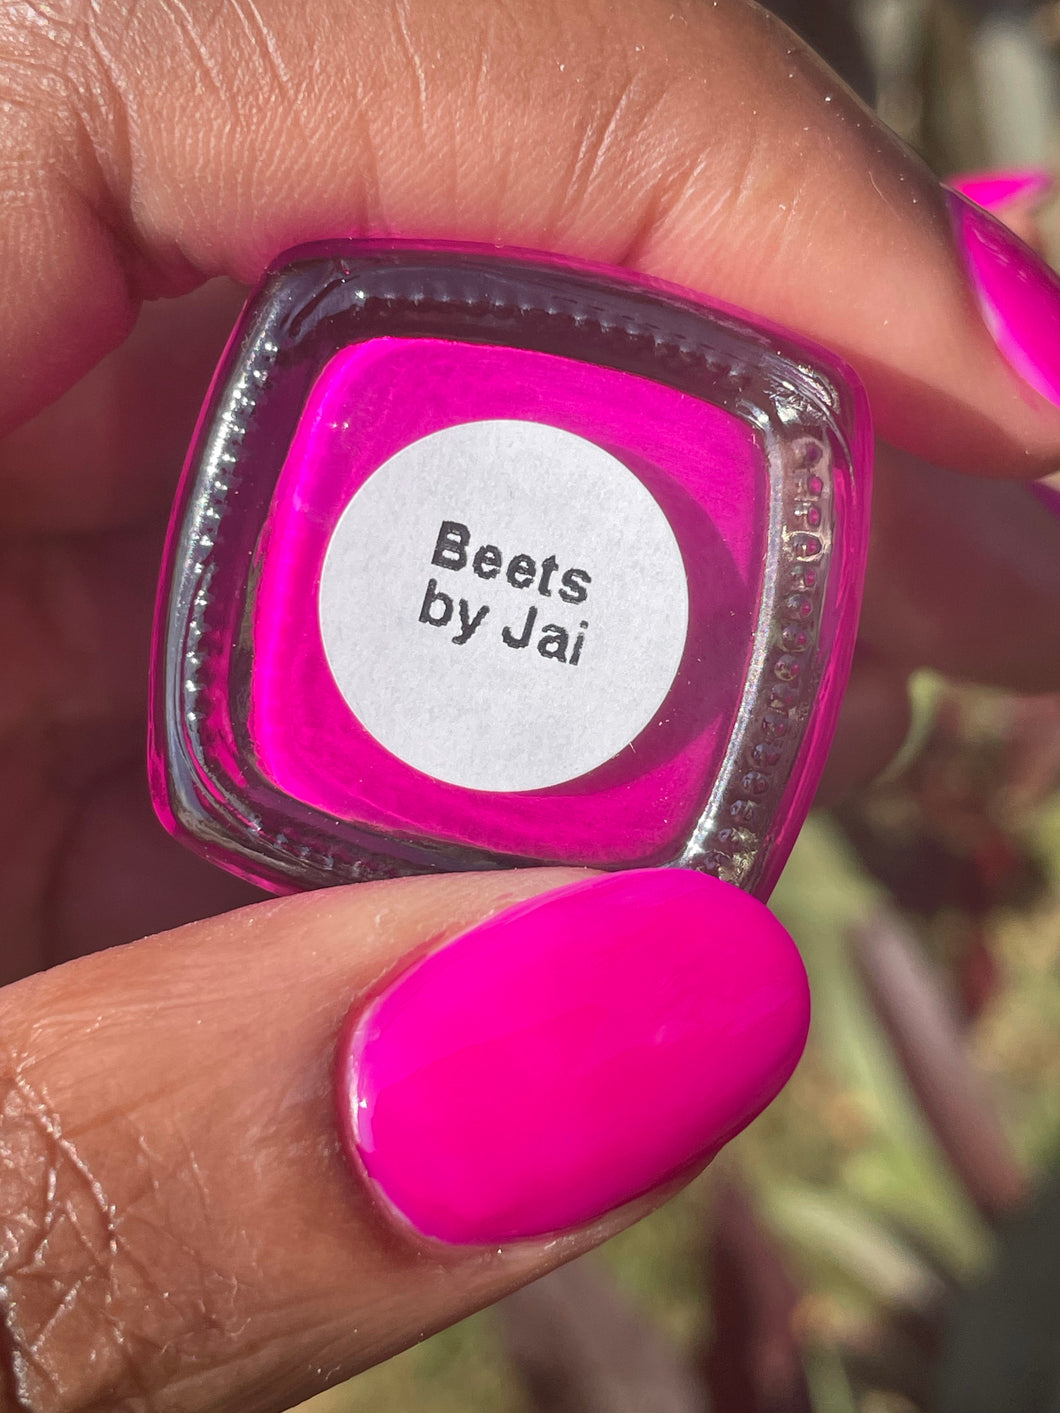 Beets by Jai